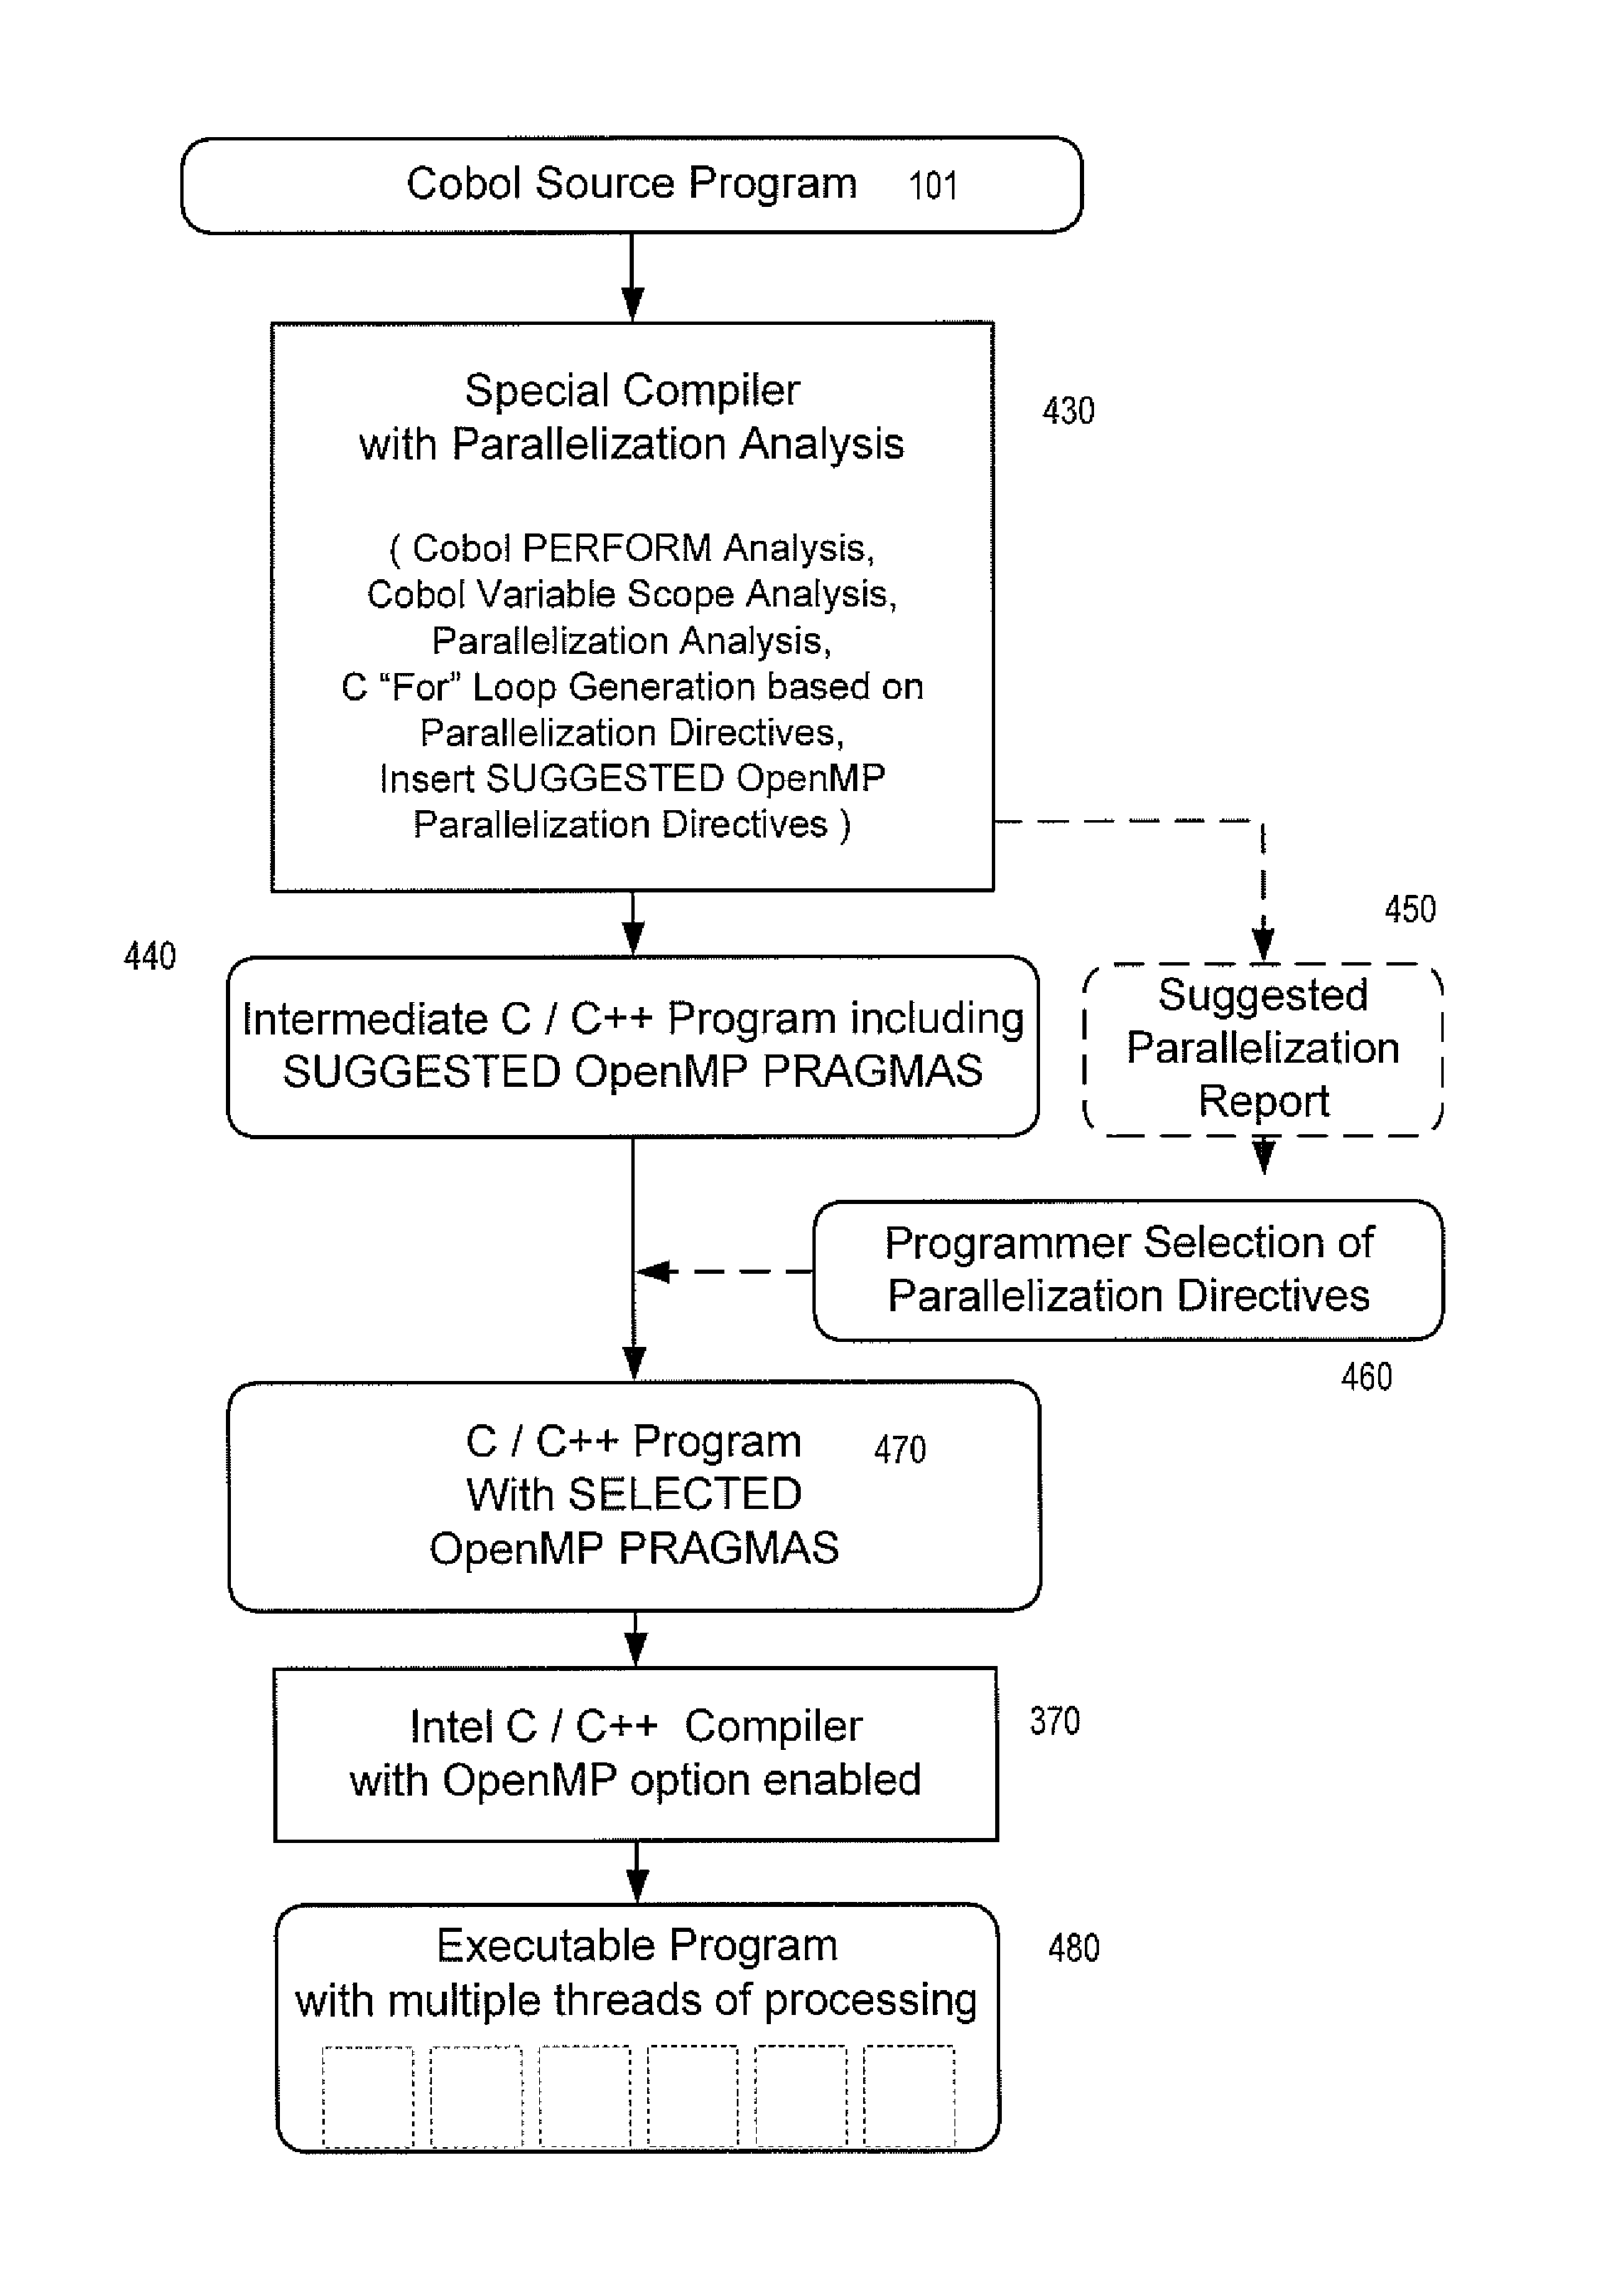 Method and apparatus enabling multi threaded program execution for a Cobol program including OpenMP directives by utilizing a two-stage compilation process